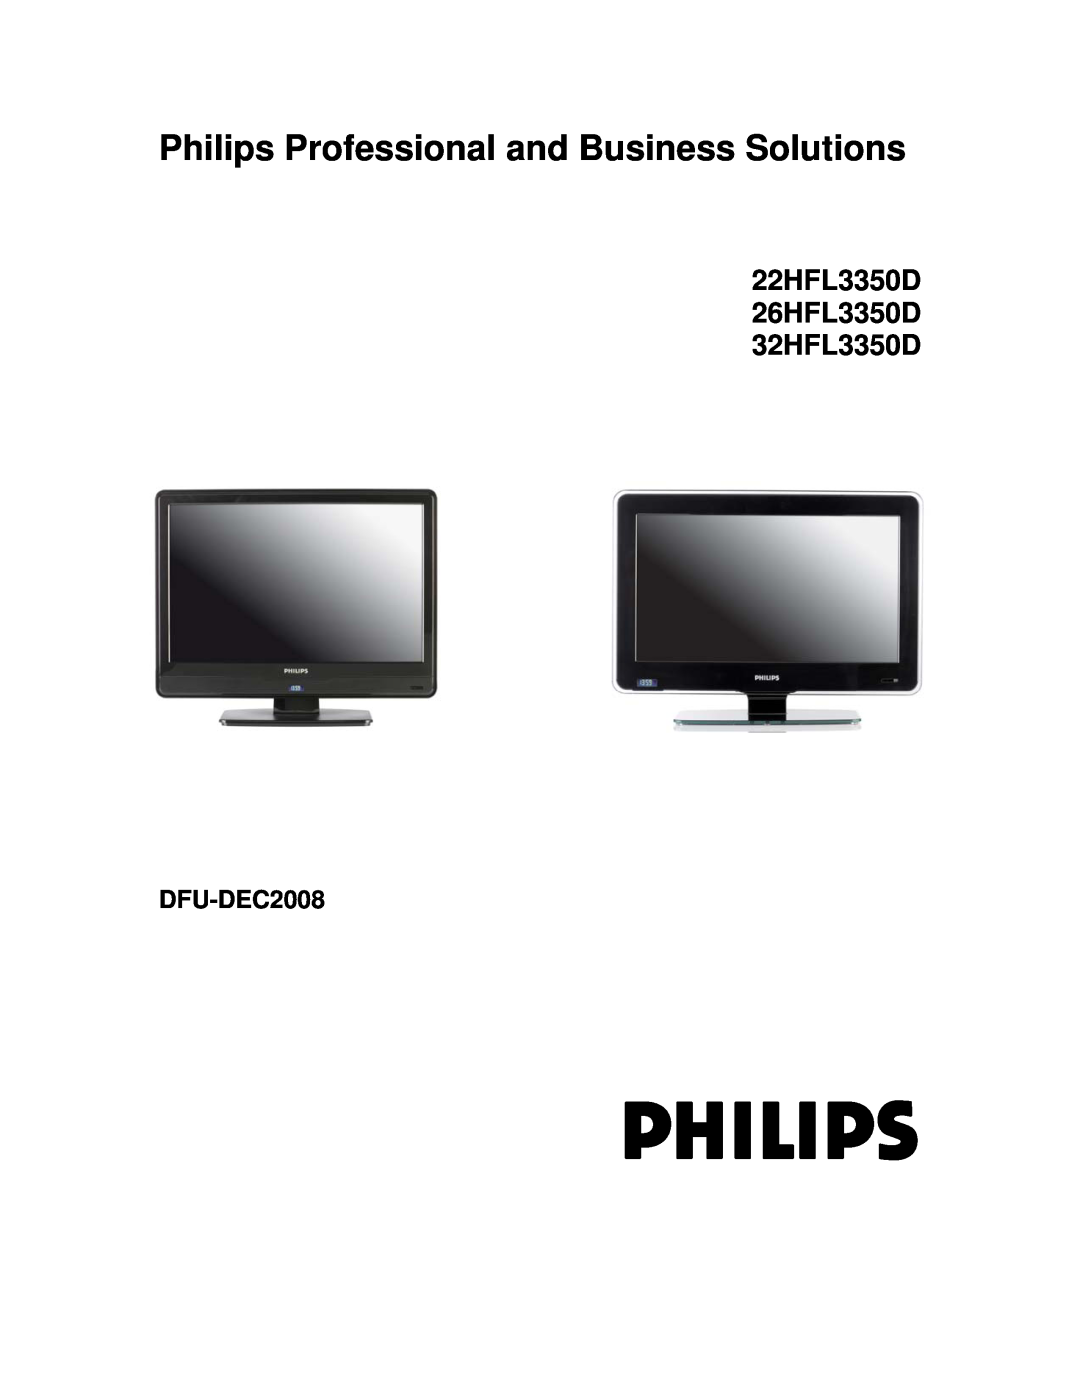 Philips DFU-DEC2008 manual Philips Professional and Business Solutions, 22HFL3350D 26HFL3350D 32HFL3350D 